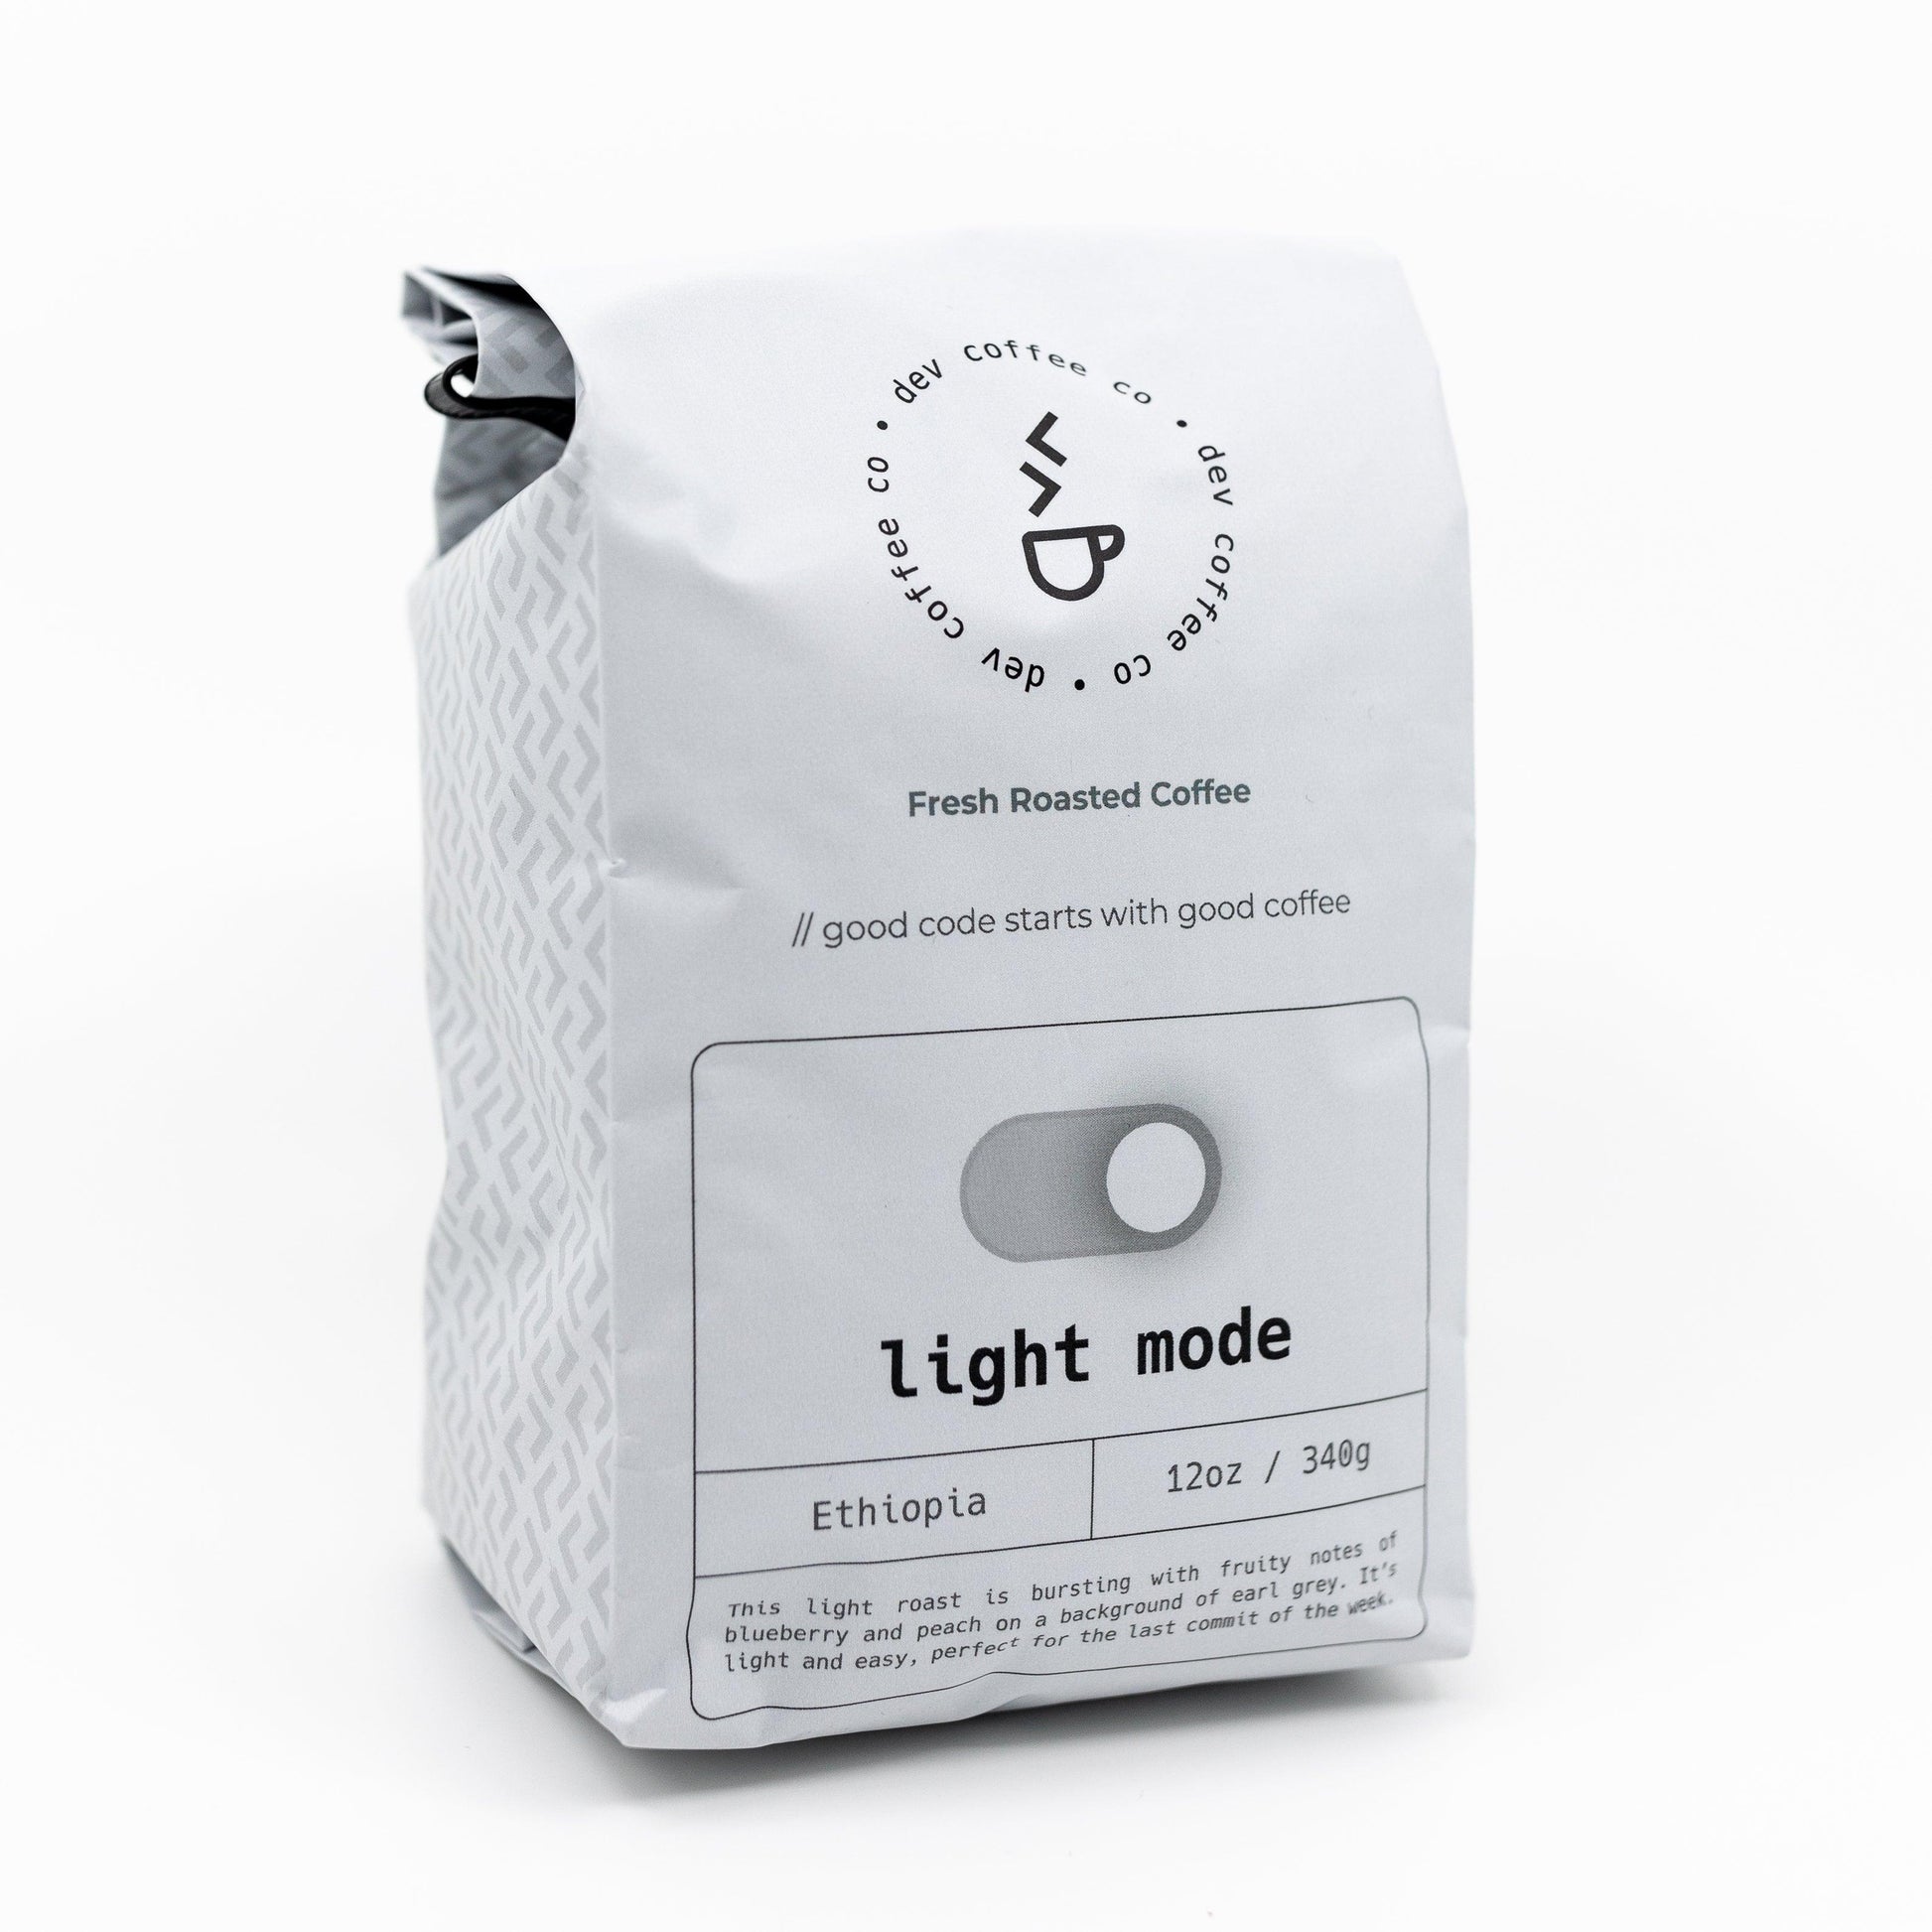 Angle of bag of 12oz "Light mode" Premium Coffee from Dev Coffee Co. Good code starts with good coffee.